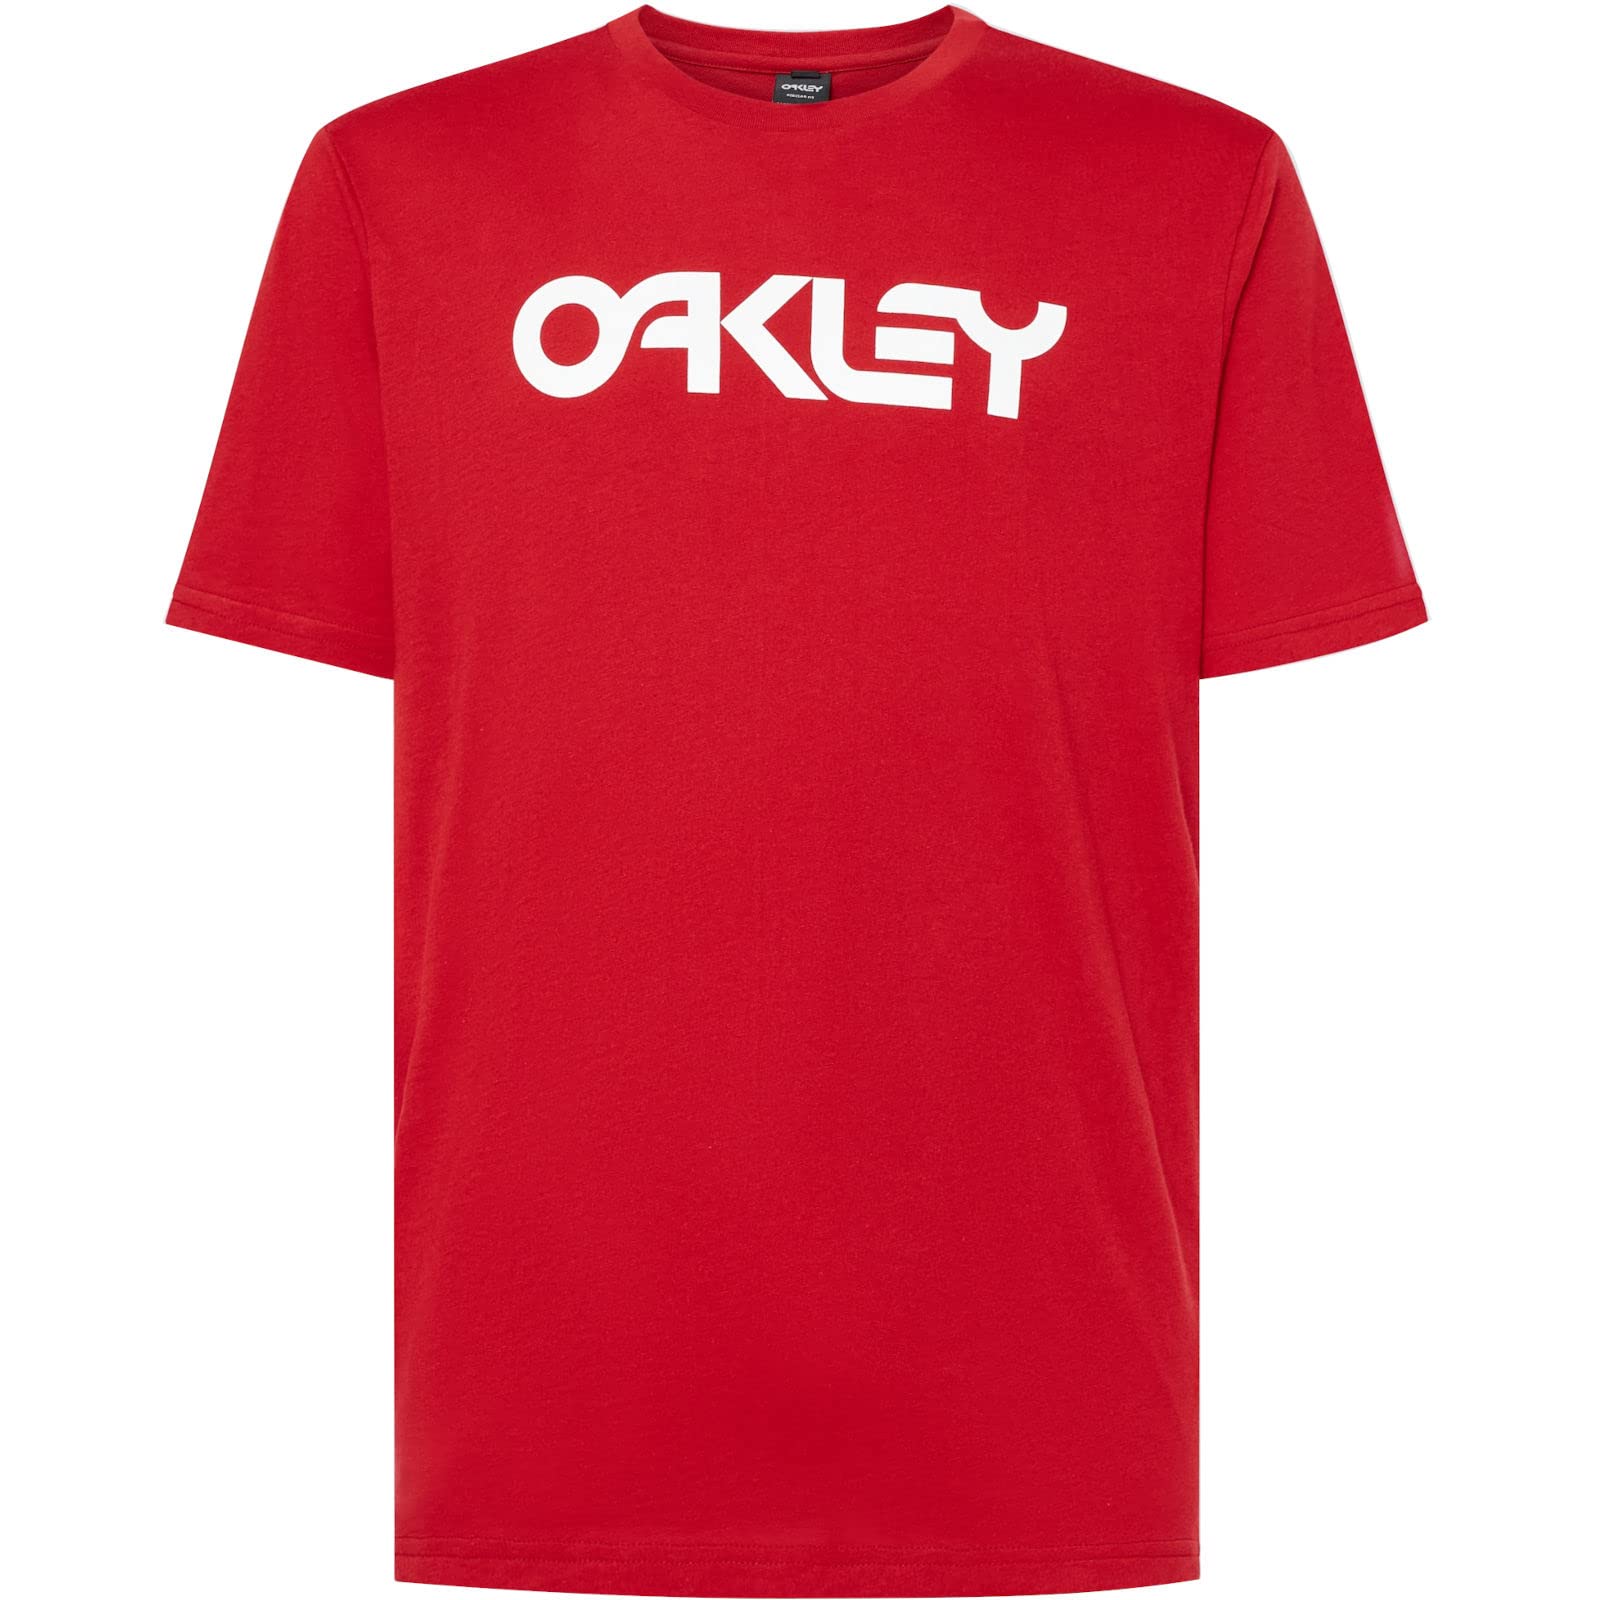 Oakley Unisex Adult Mark Ii Tee 2.0 T-Shirt XS, M, L, XL (Samba Red) $10.00 + Free Shipping w/ Prime or on $35+